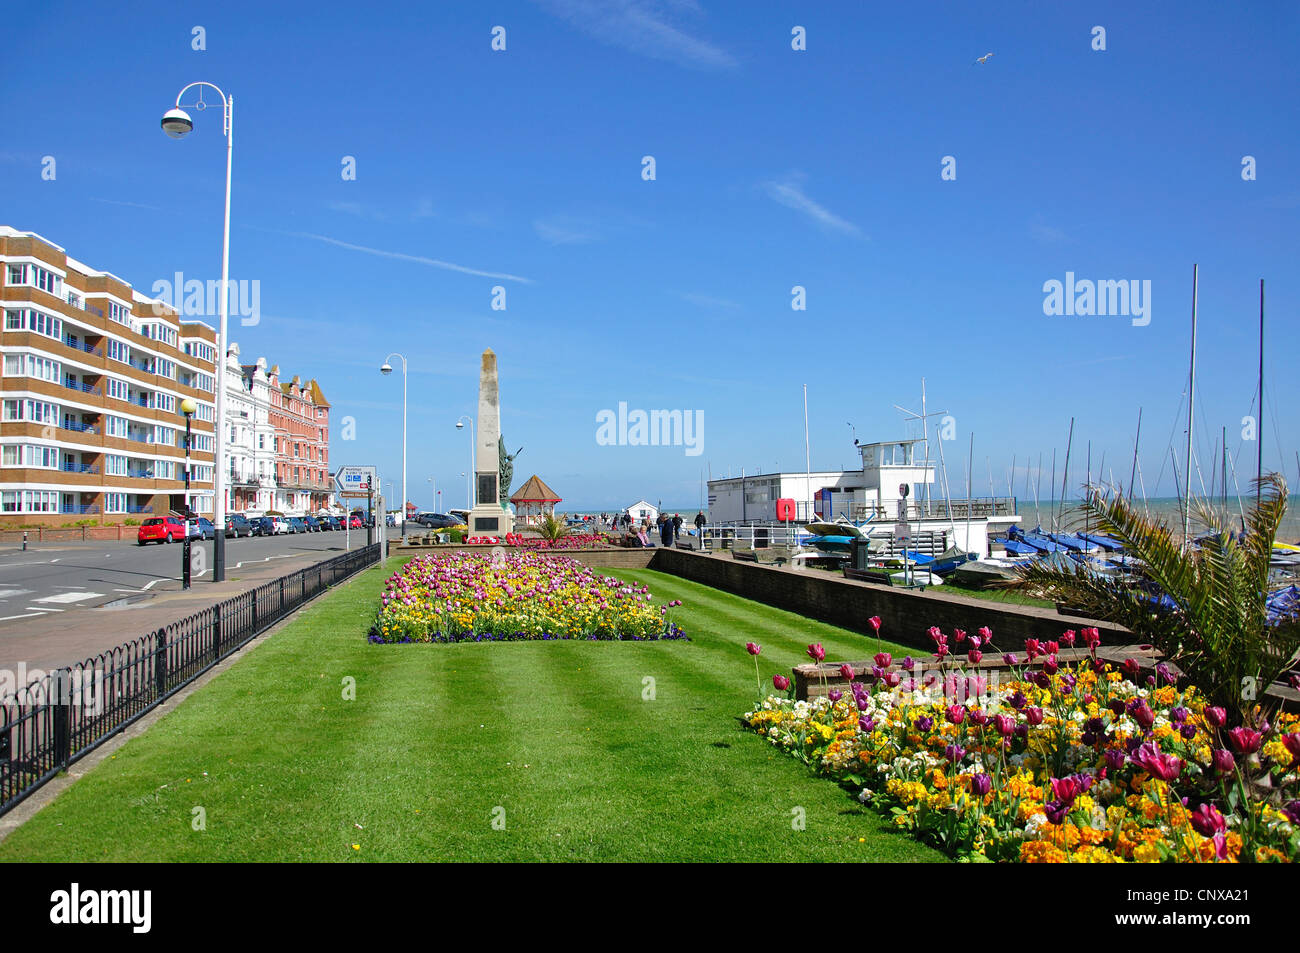 Seafront promenade, Bexhill-on-Sea, East Sussex, England, United Kingdom Stock Photo